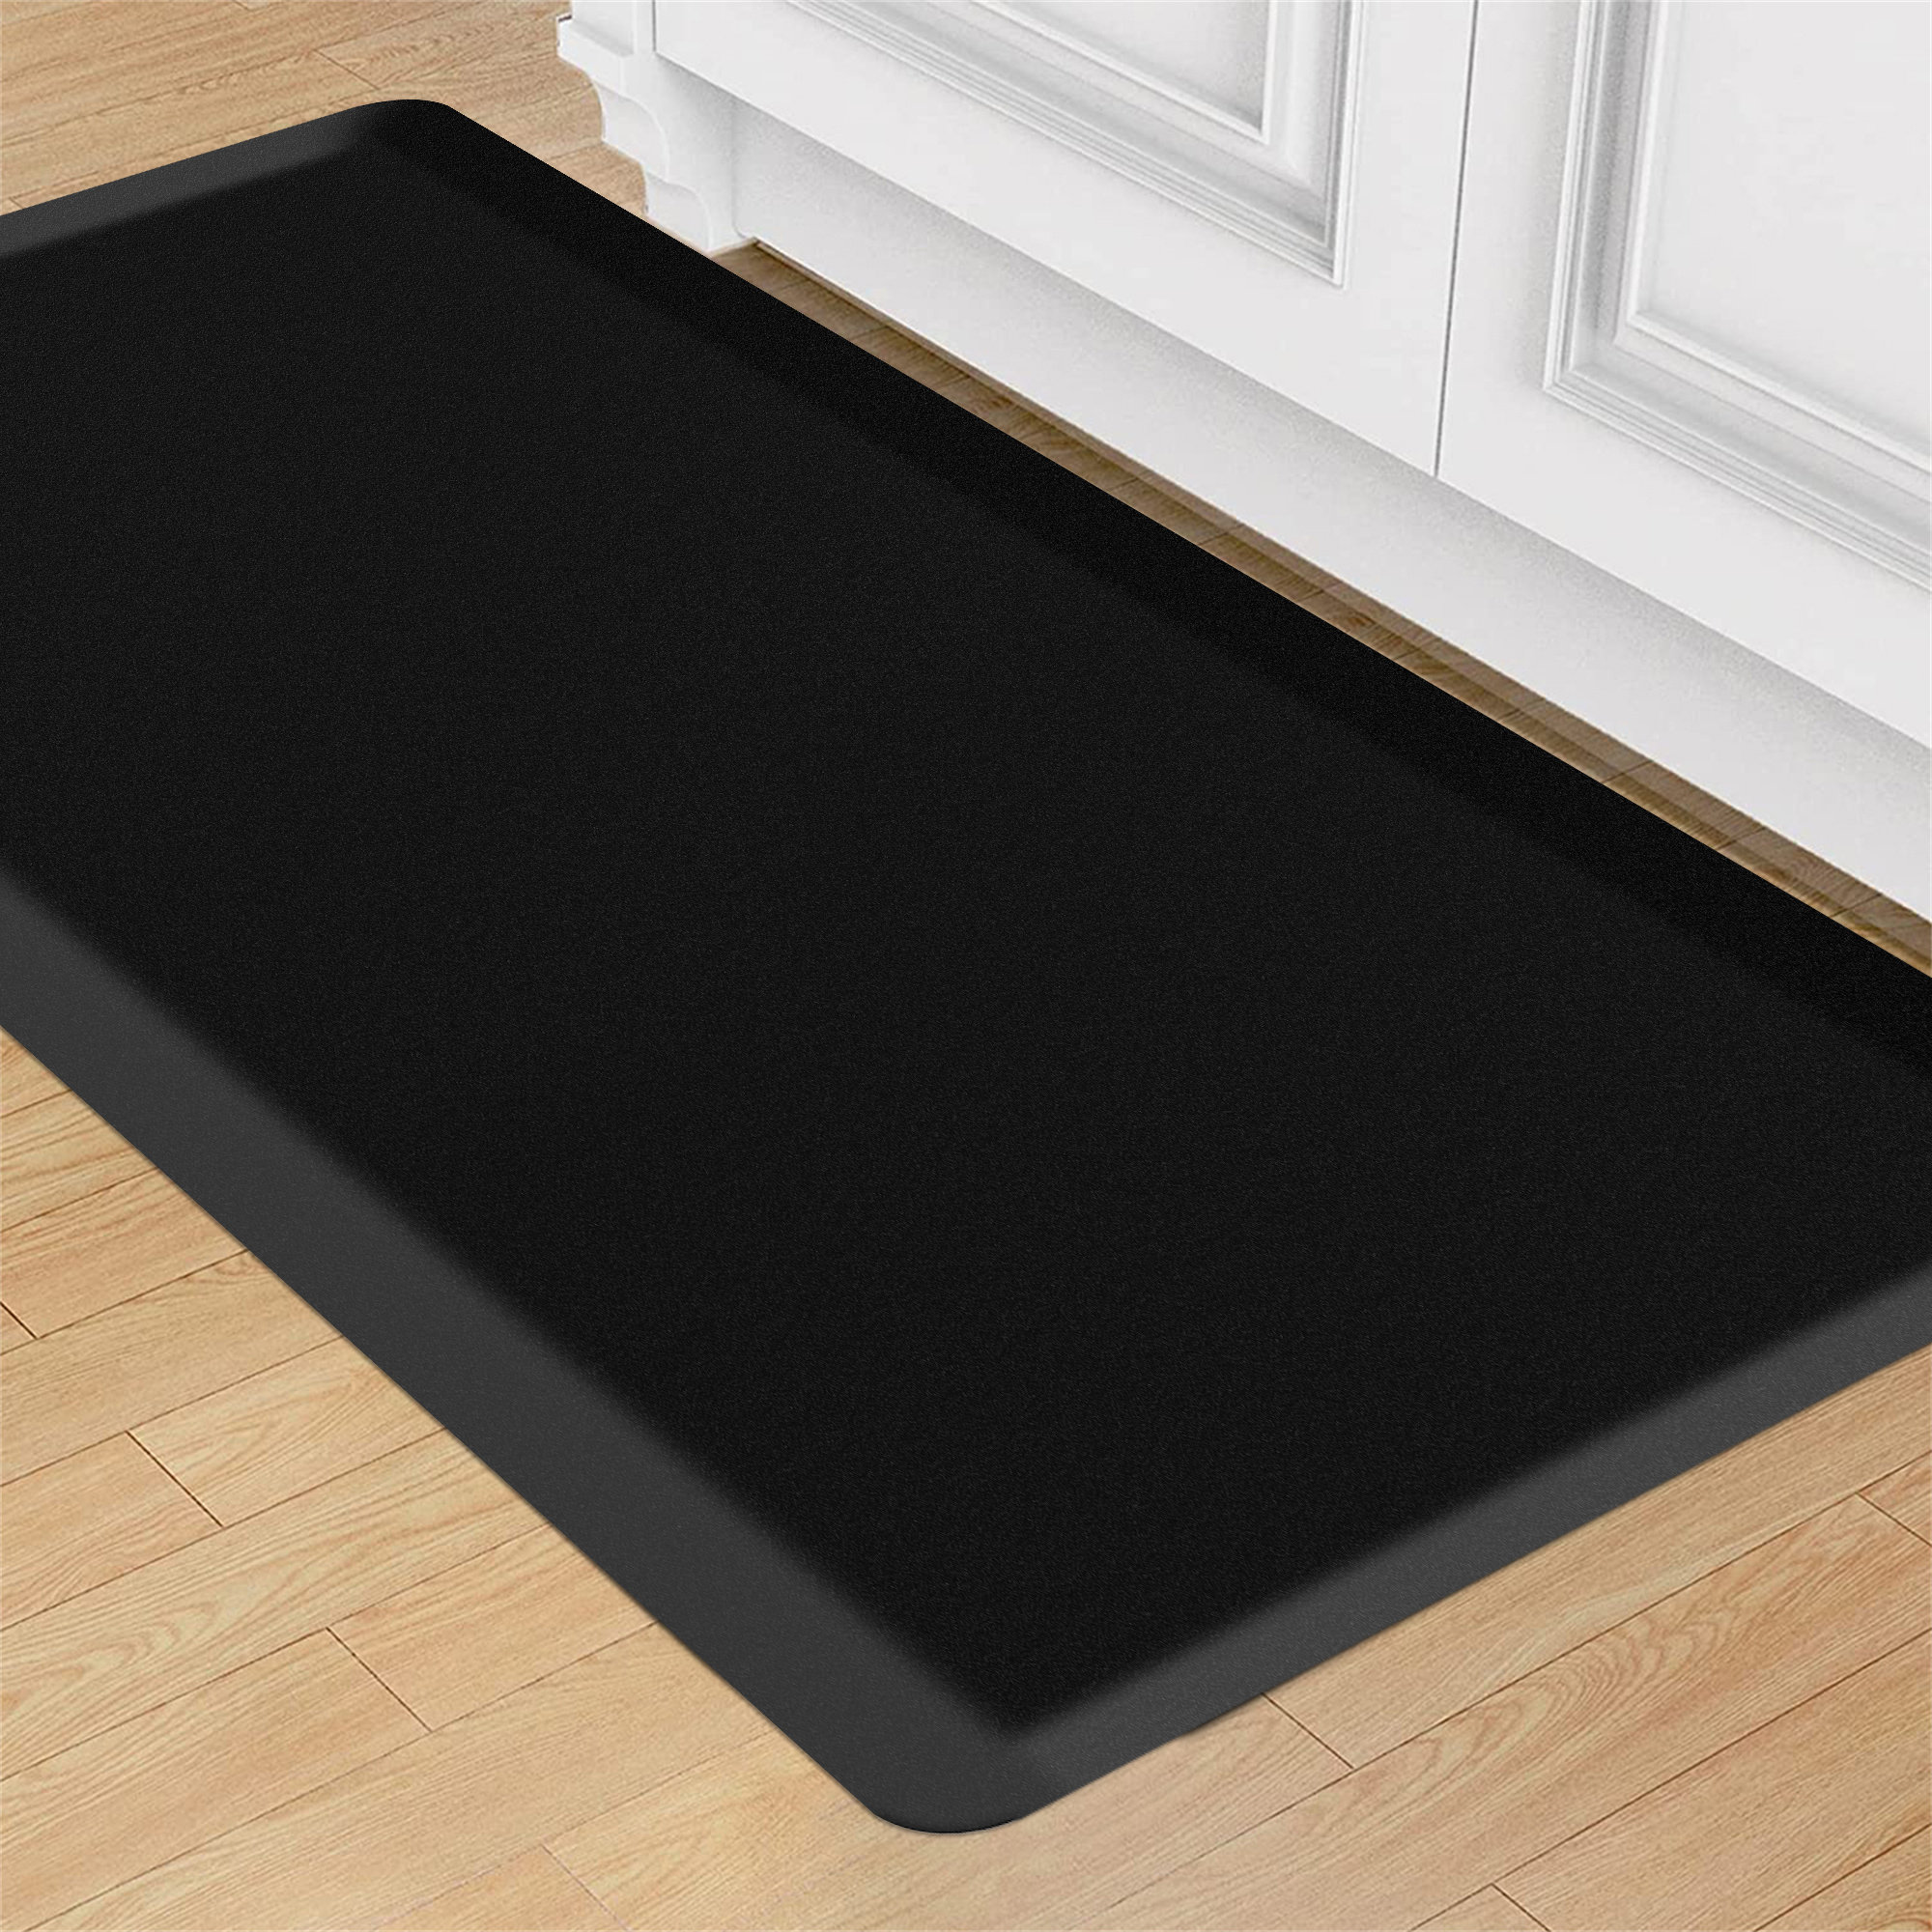 Anti-Fatigue Comfort Mat, Extra Support and Thick Floor Mats - Bed